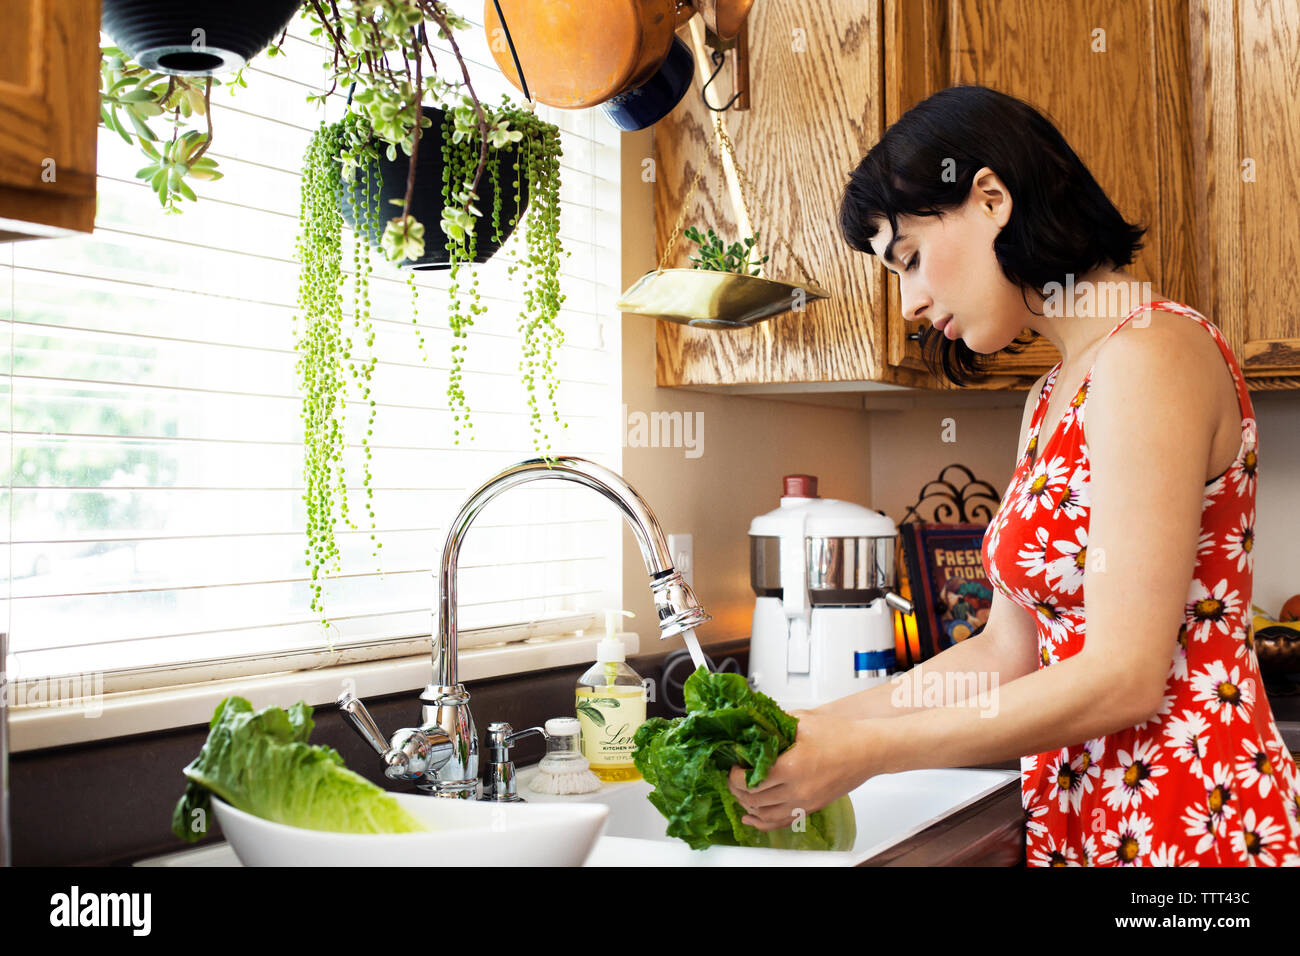 Side view of woman washing lettuce in kitchen sink Stock Photo